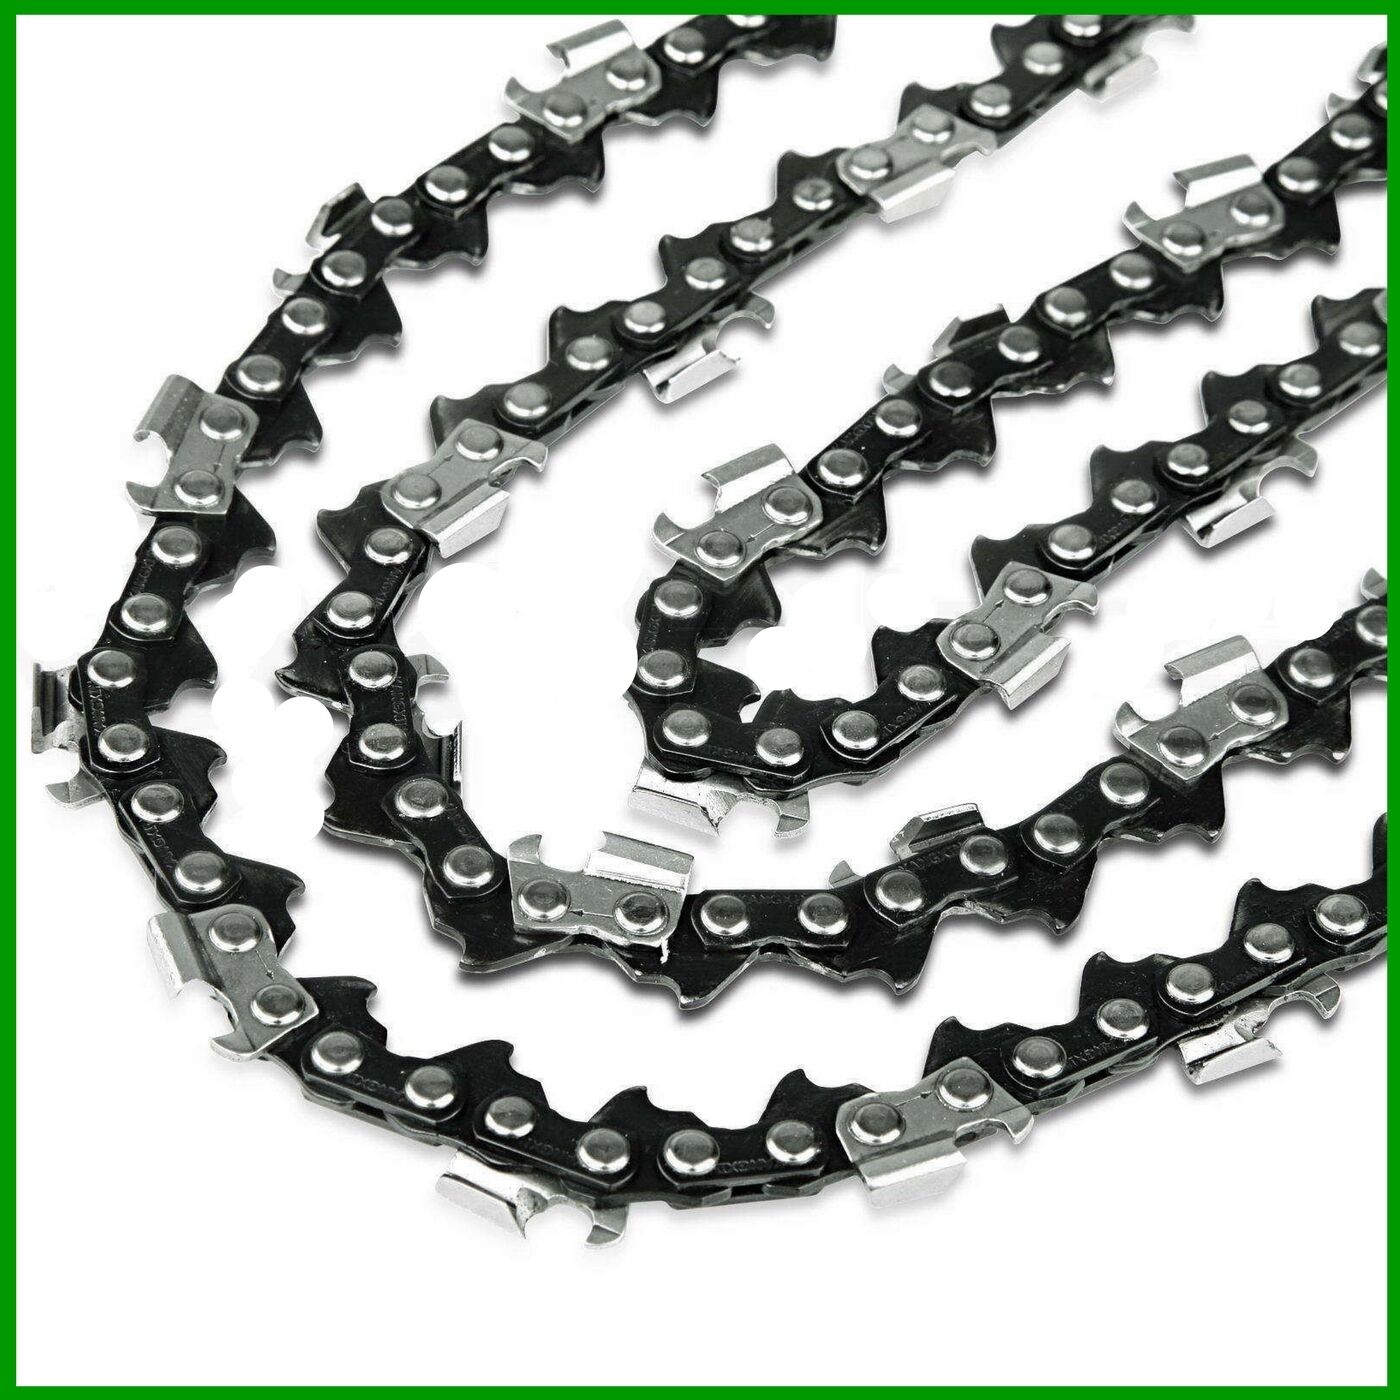 12" BAR & 3 CHAINS COMBO FOR HOMELITE PETROL CHAINSAW HBCS3530